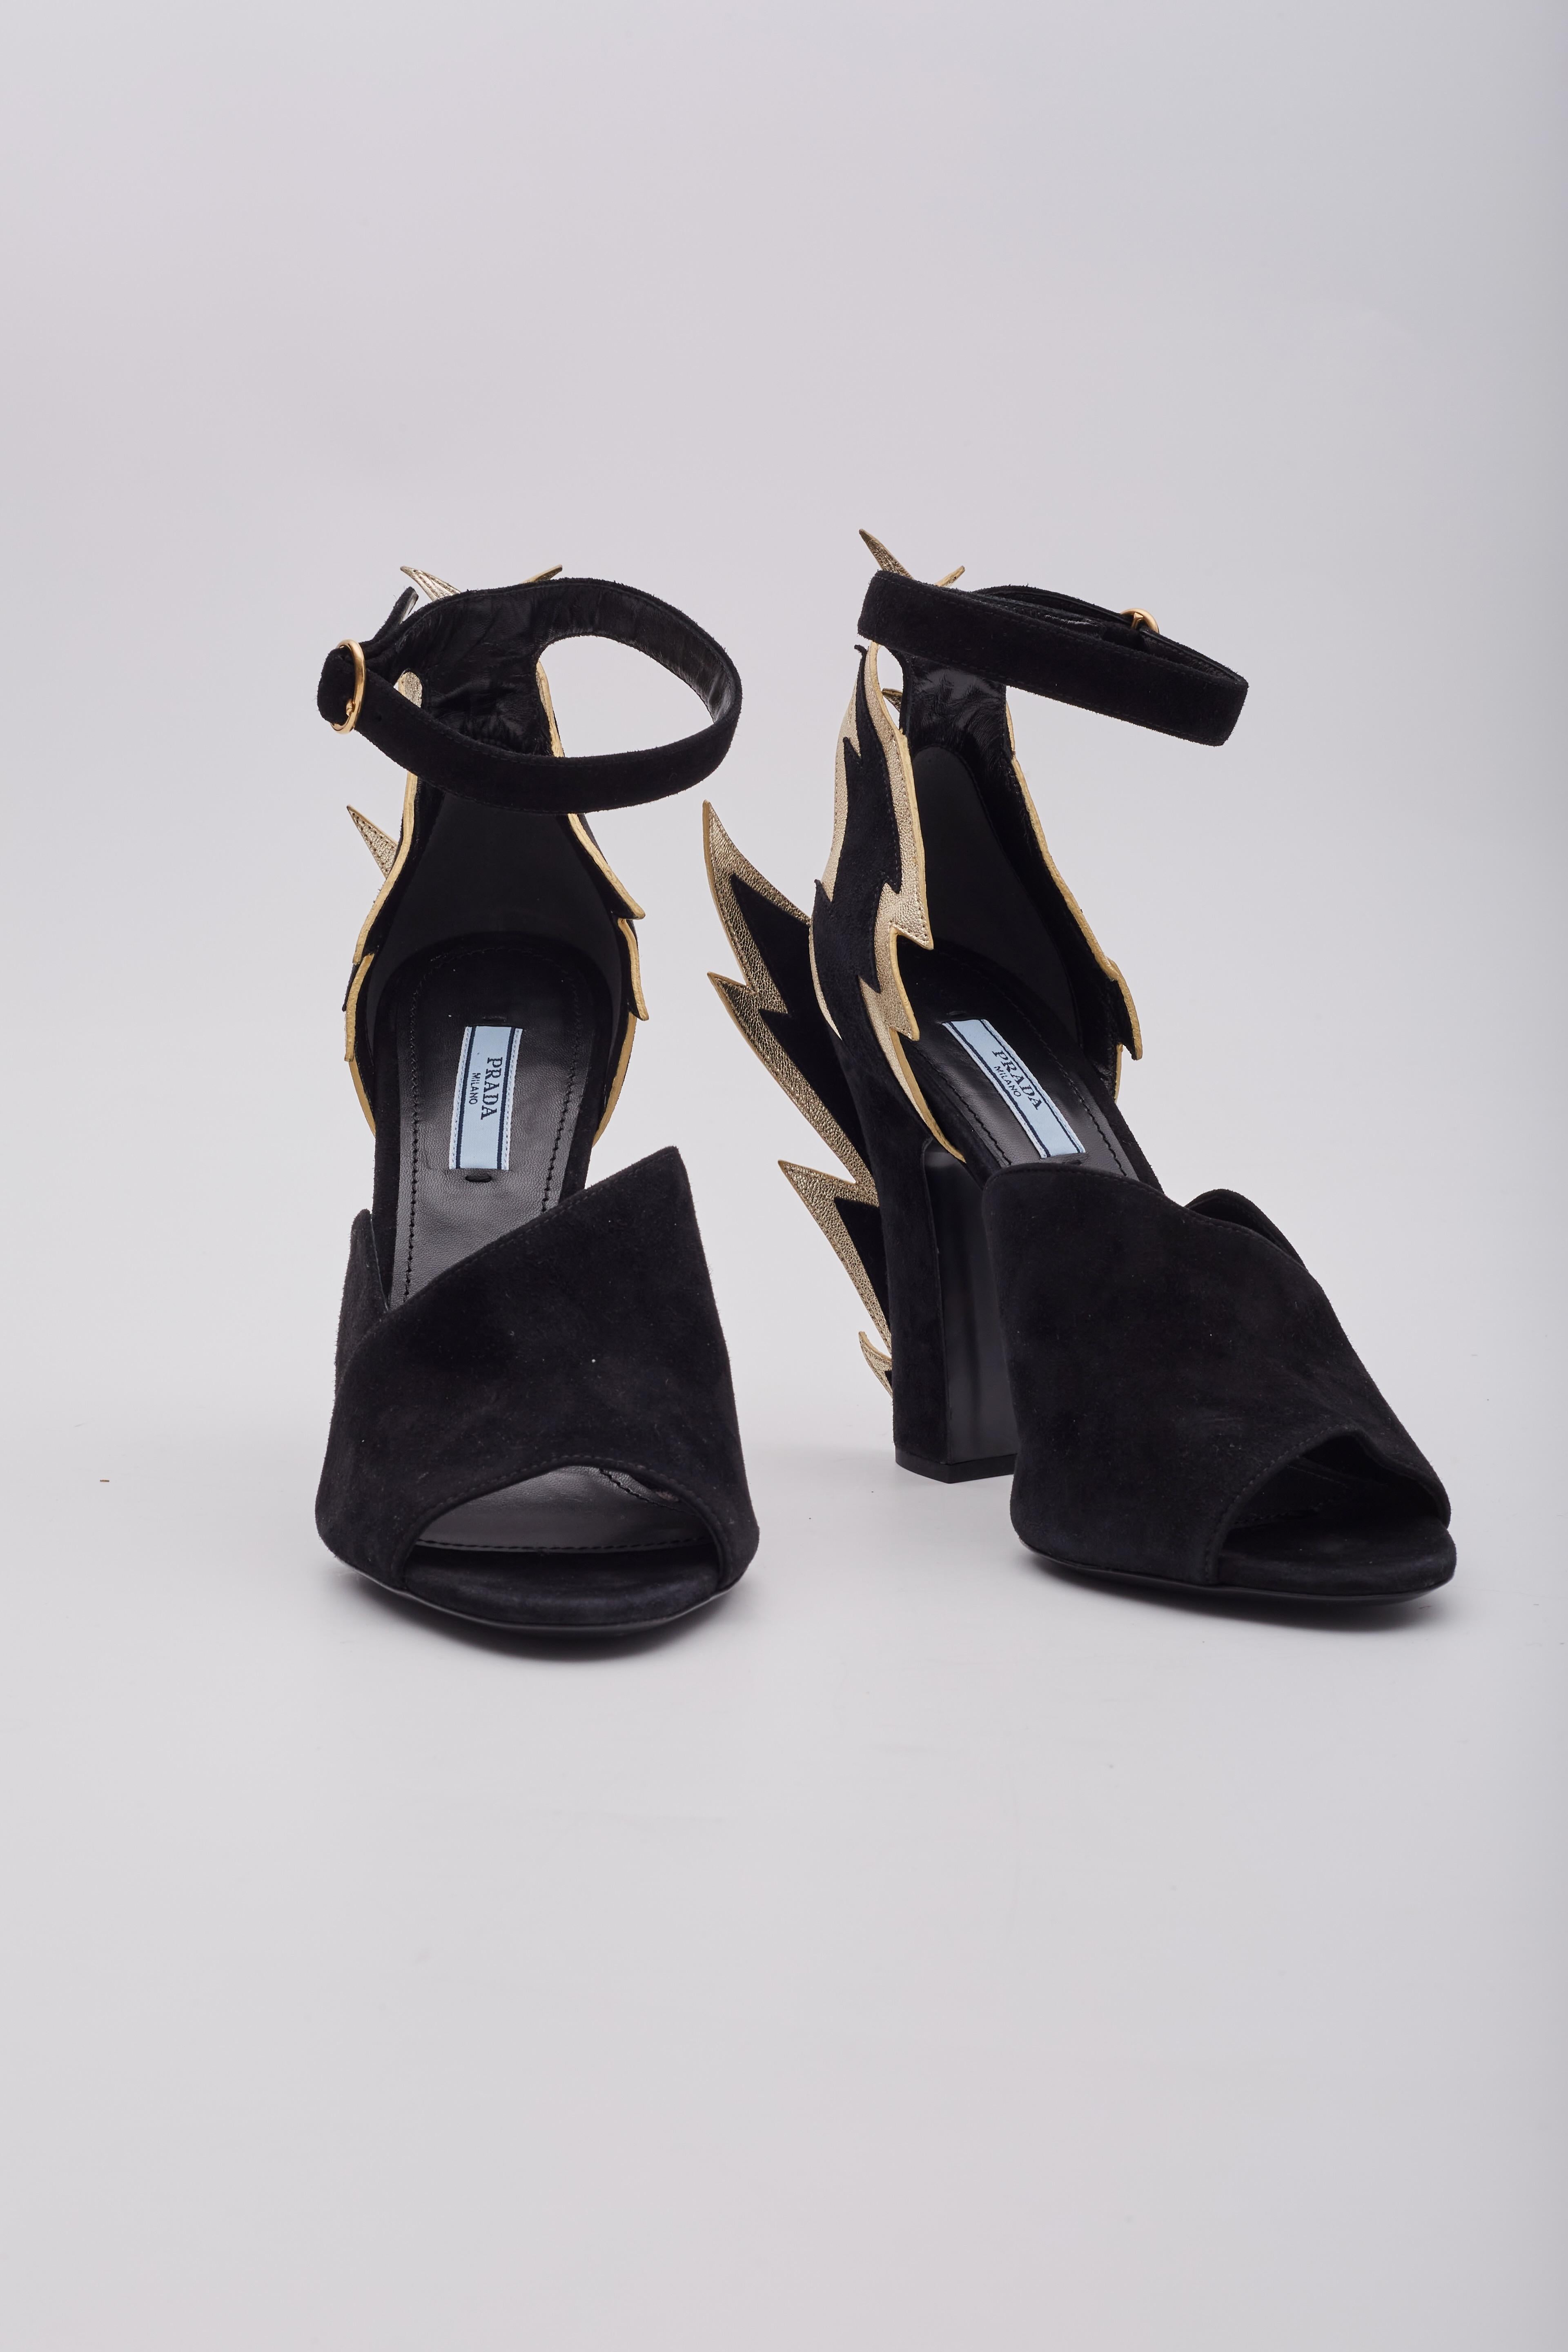 Featuring black suede construction, the Lightning bolt on the heel with gold leather trim, ankle strap closure, peep toe and a chunky heel.Estimated Retail Price: US $1250.

Color: Black
Material: Suede
Designer: Miuccia
Year/Collection: 2019